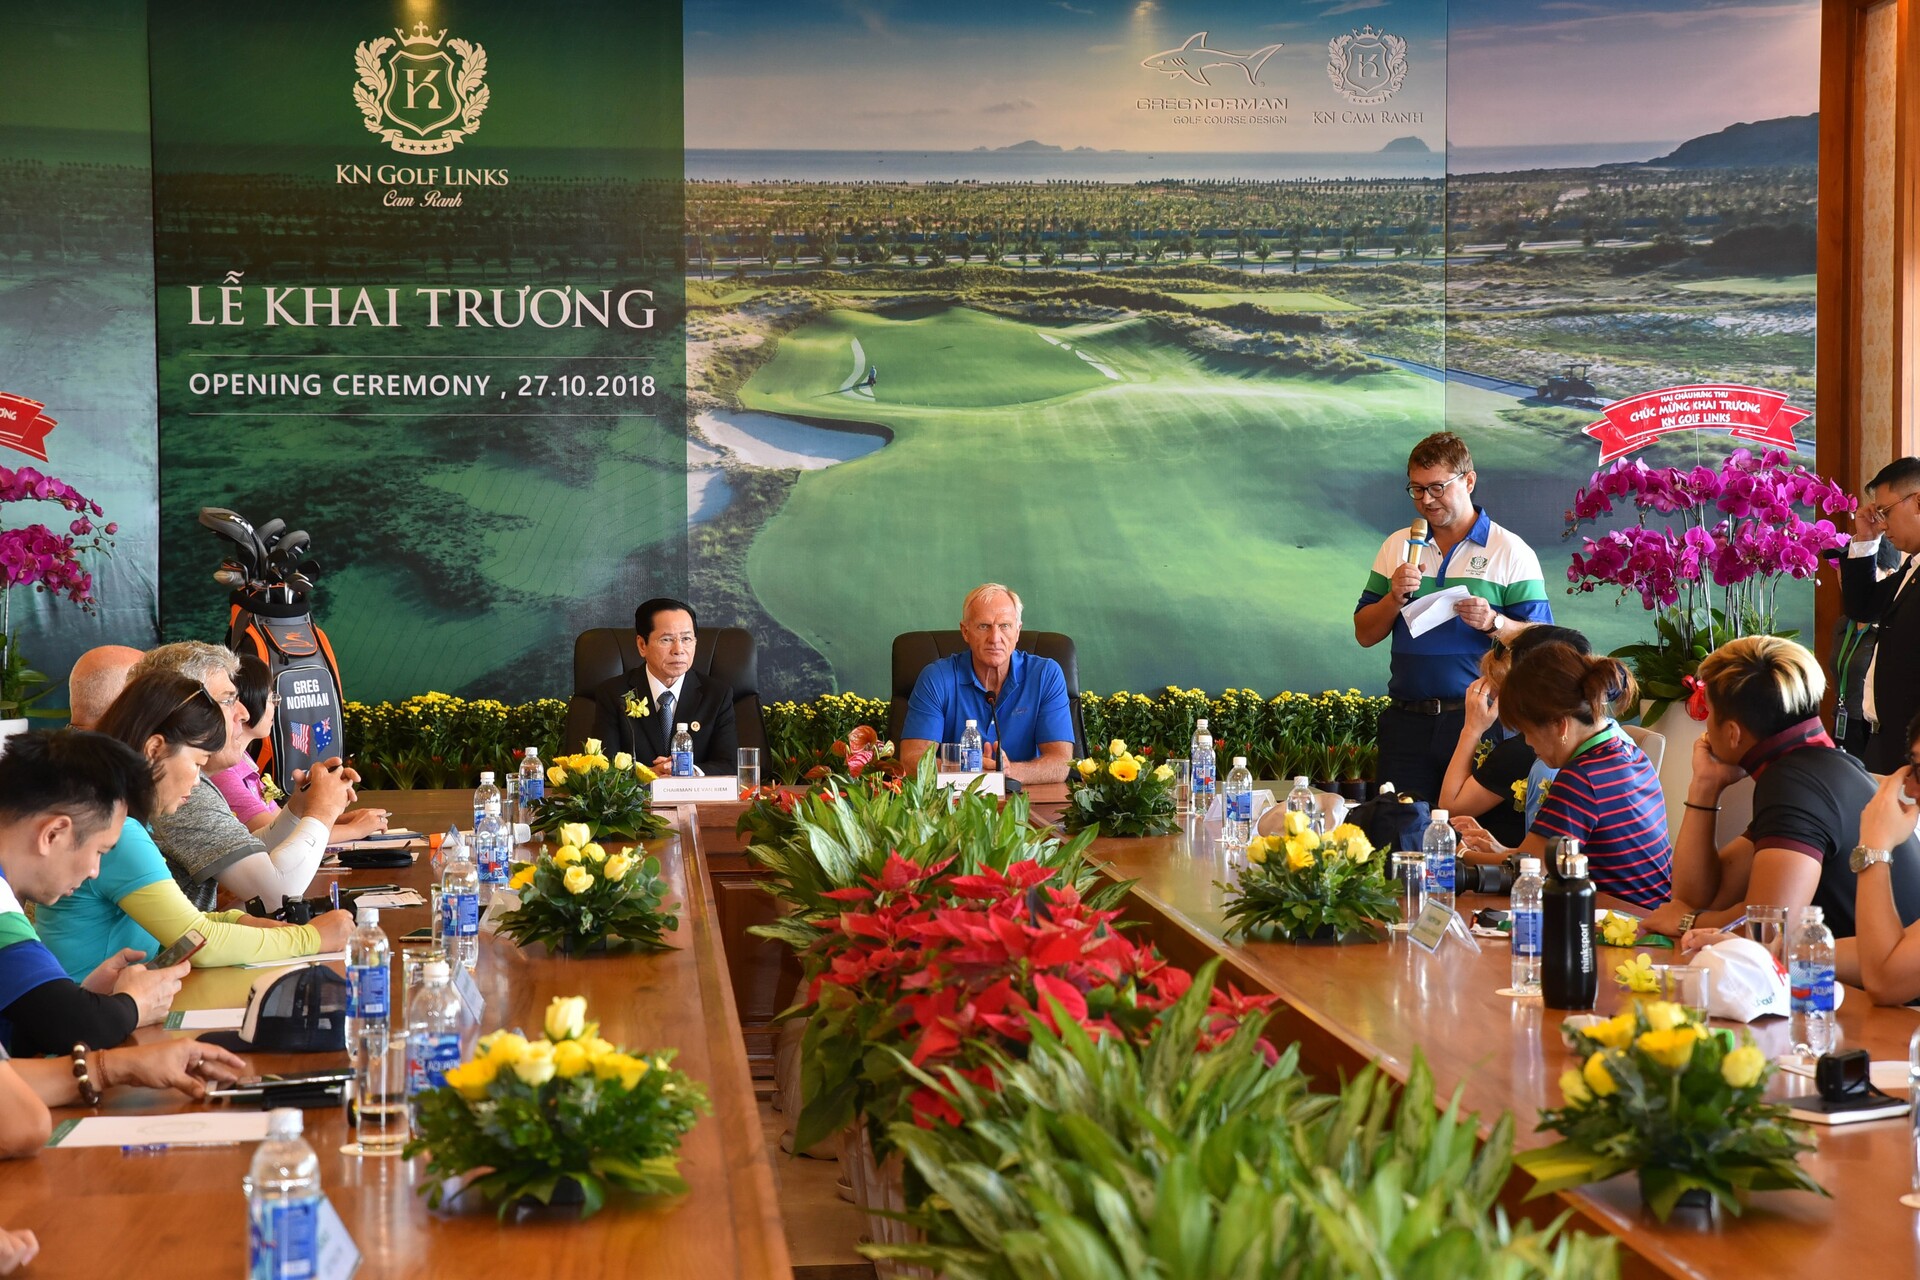 Greg Norman’s Third Course in Vietnam Opens for Play